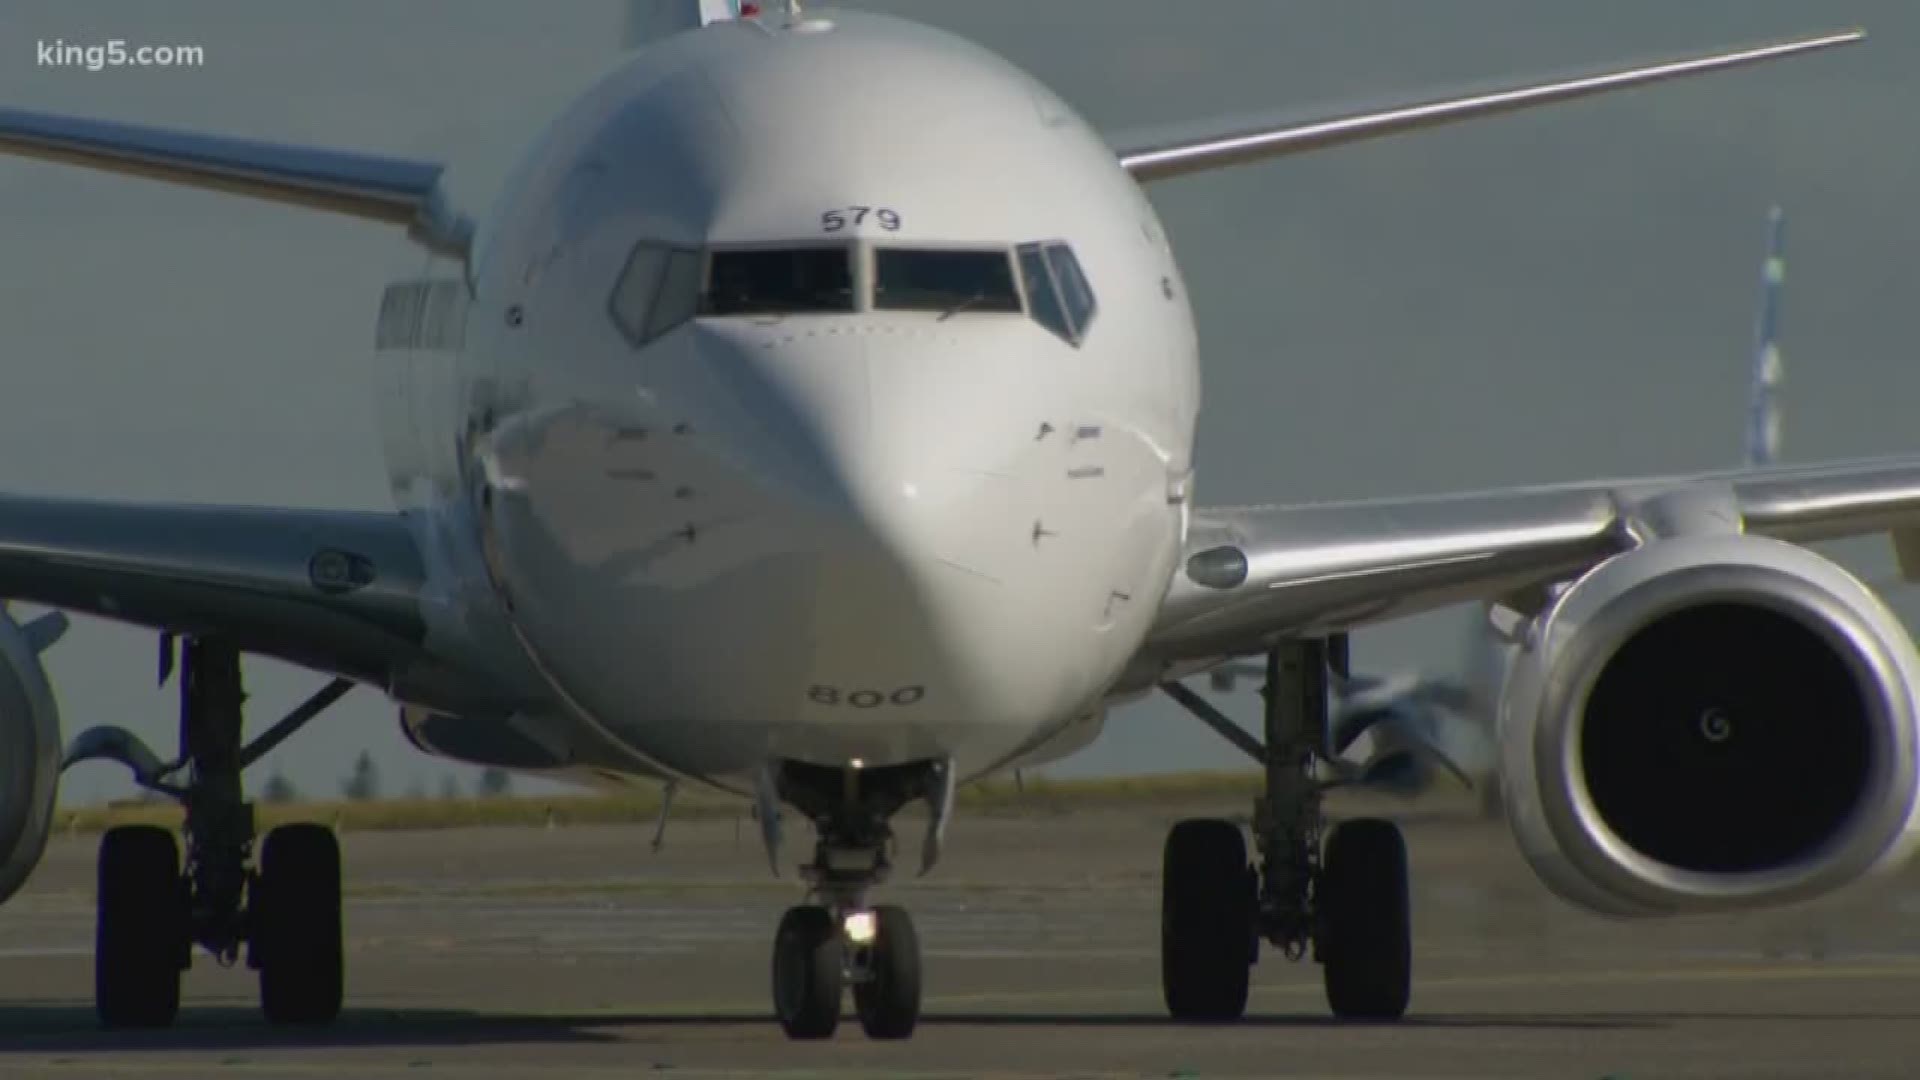 KING 5's Ted Land talks about biofuel in the airline industry.